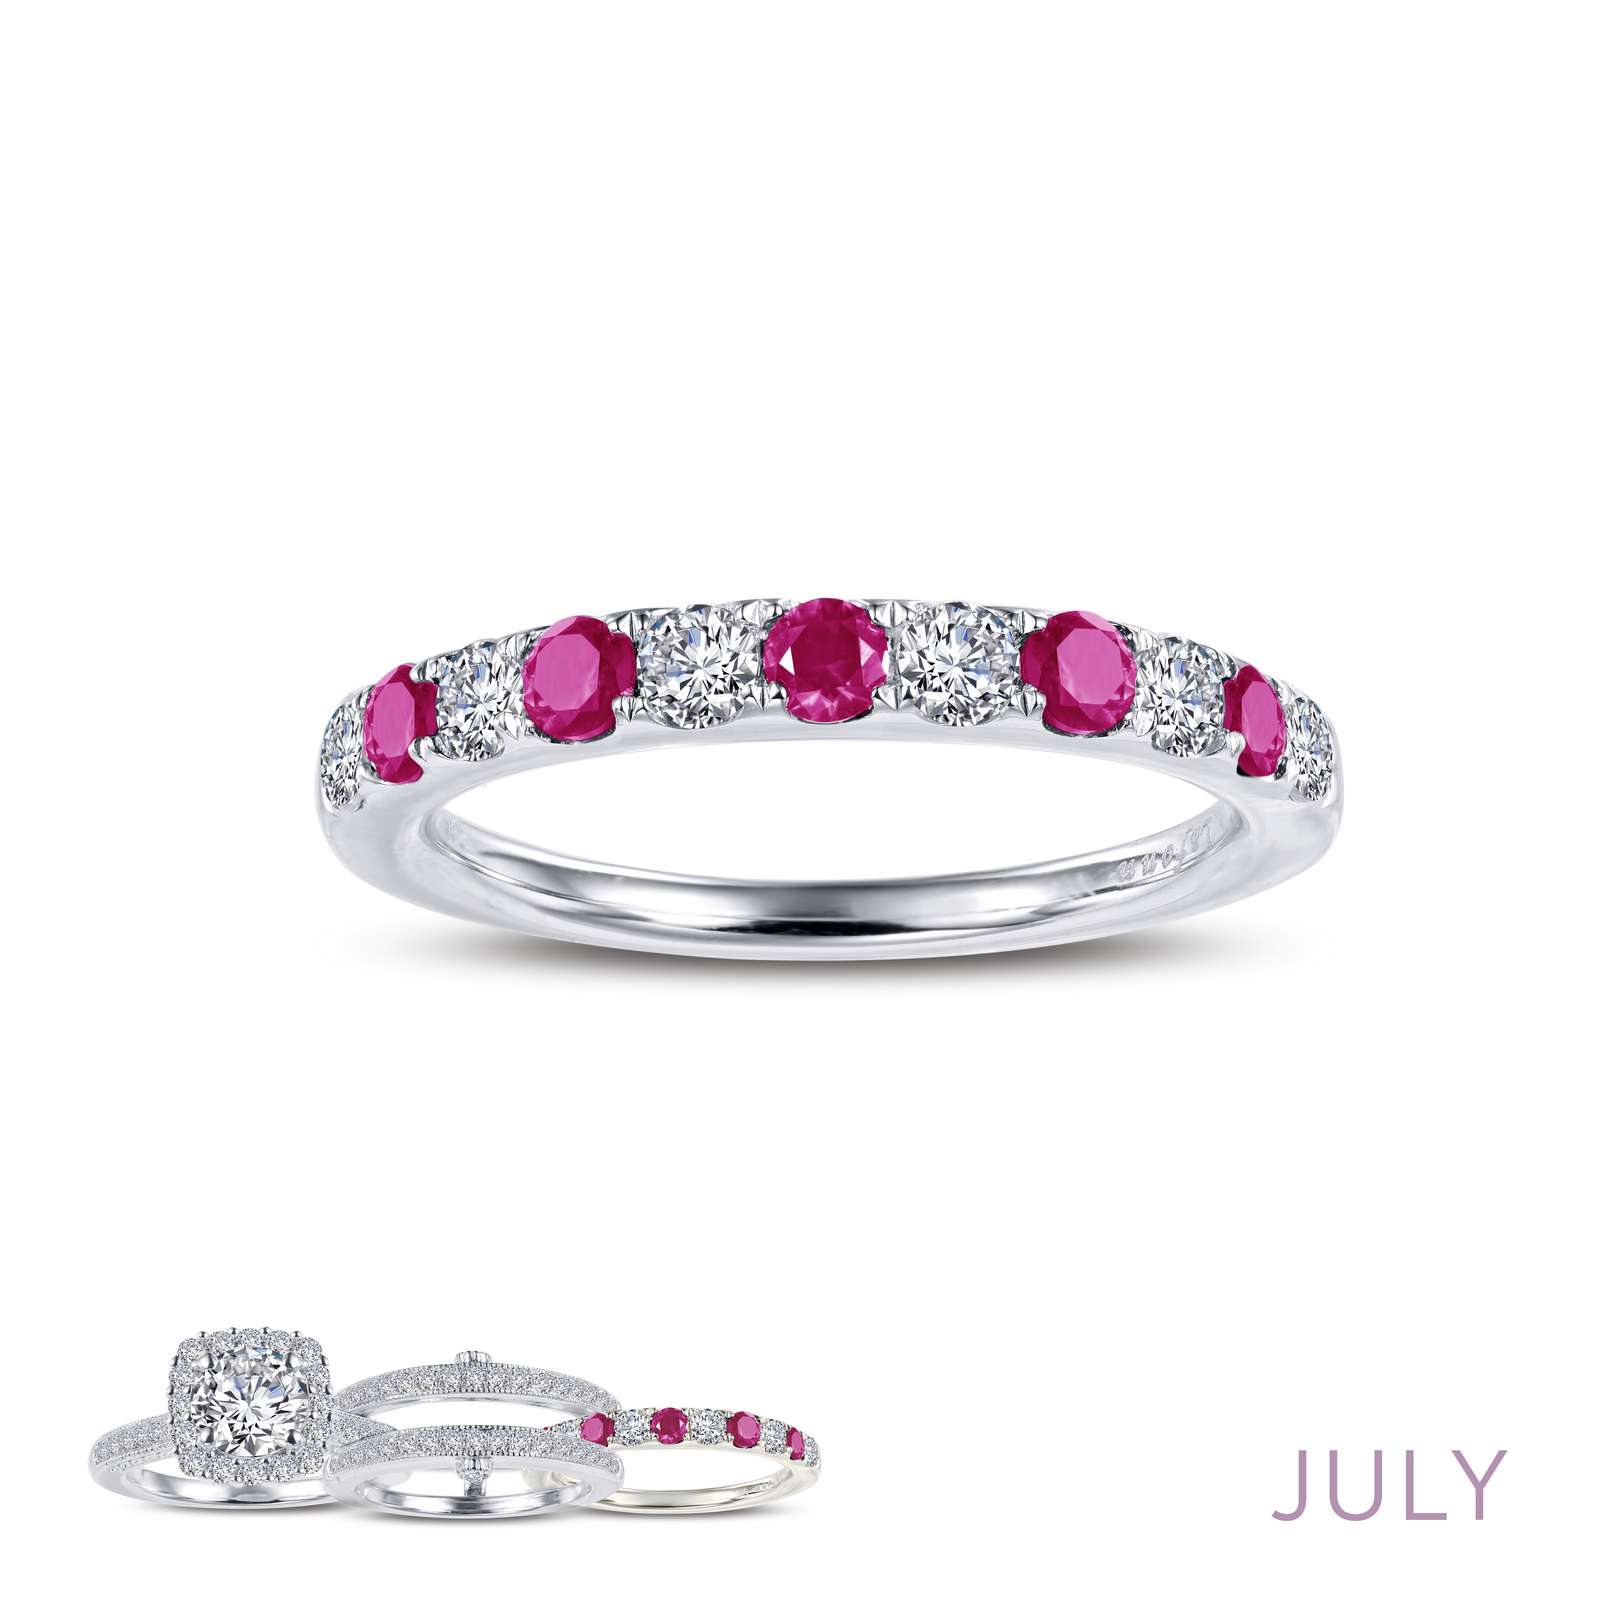 July Birthstone Ring Griner Jewelry Co. Moultrie, GA